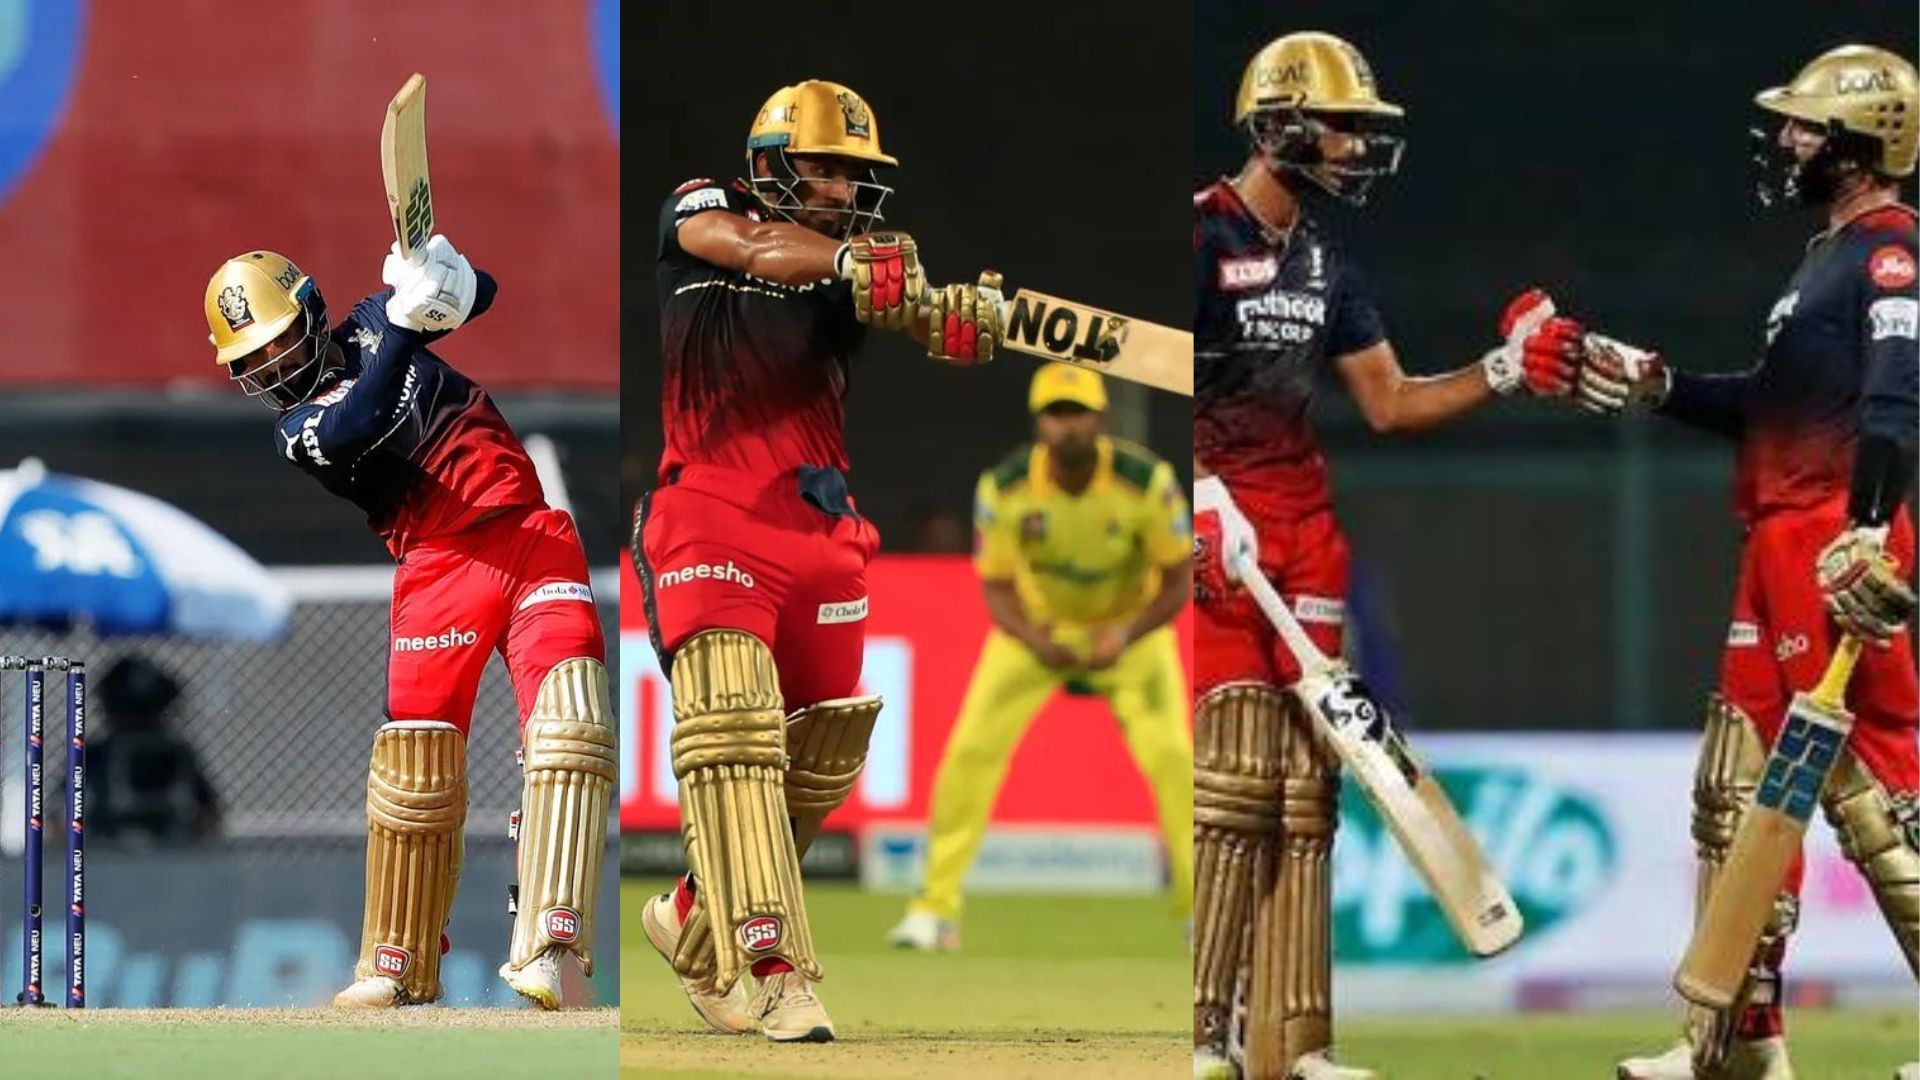 While RCB&#039;s star batters have been inconsistent, others have shouldered the responsibility quite well so far, according to Aakash Chopra. (P.C.:iplt20.com)